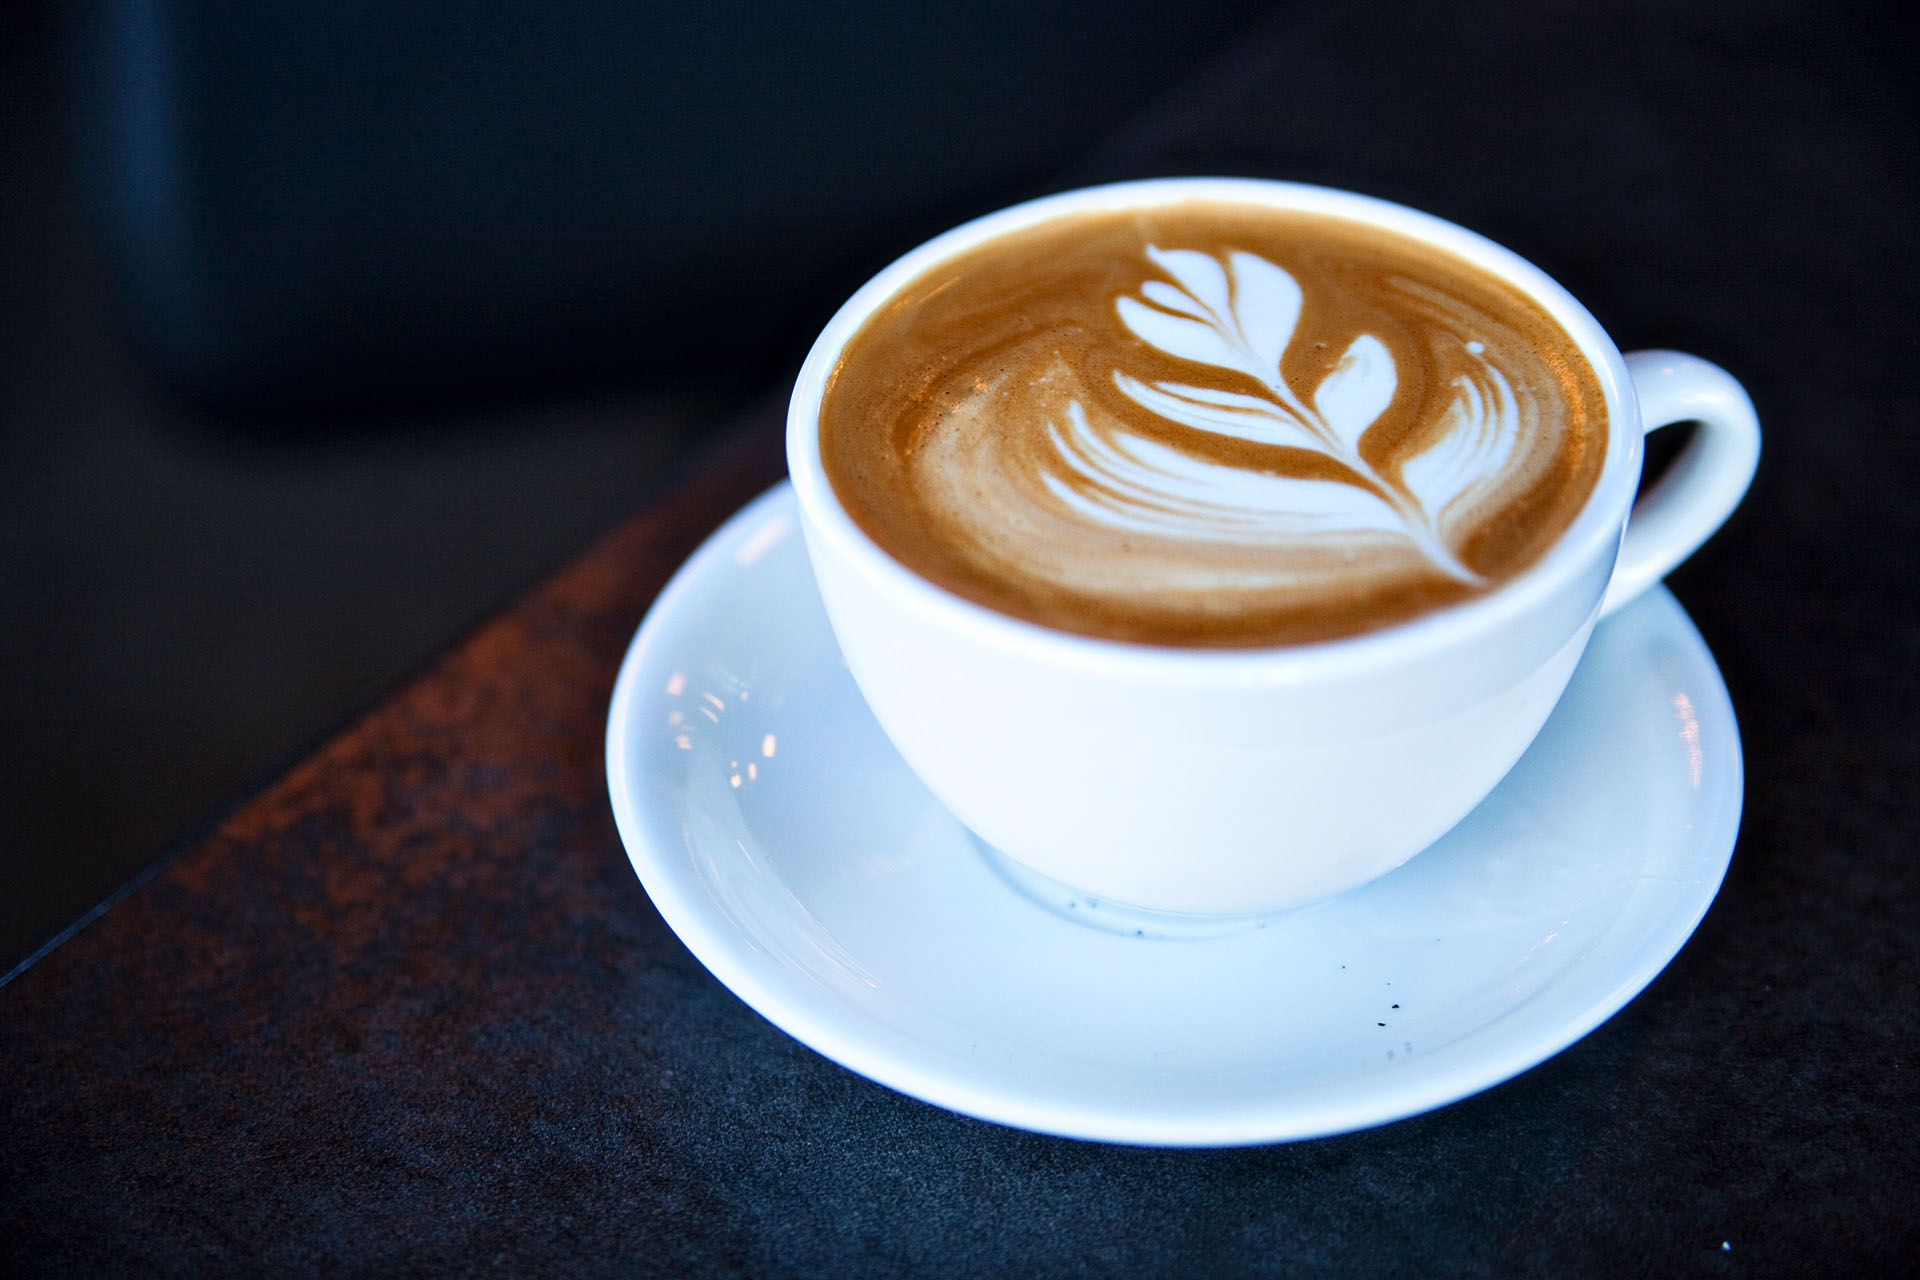 What Are The Best Specialty Coffee Shops In Your World?